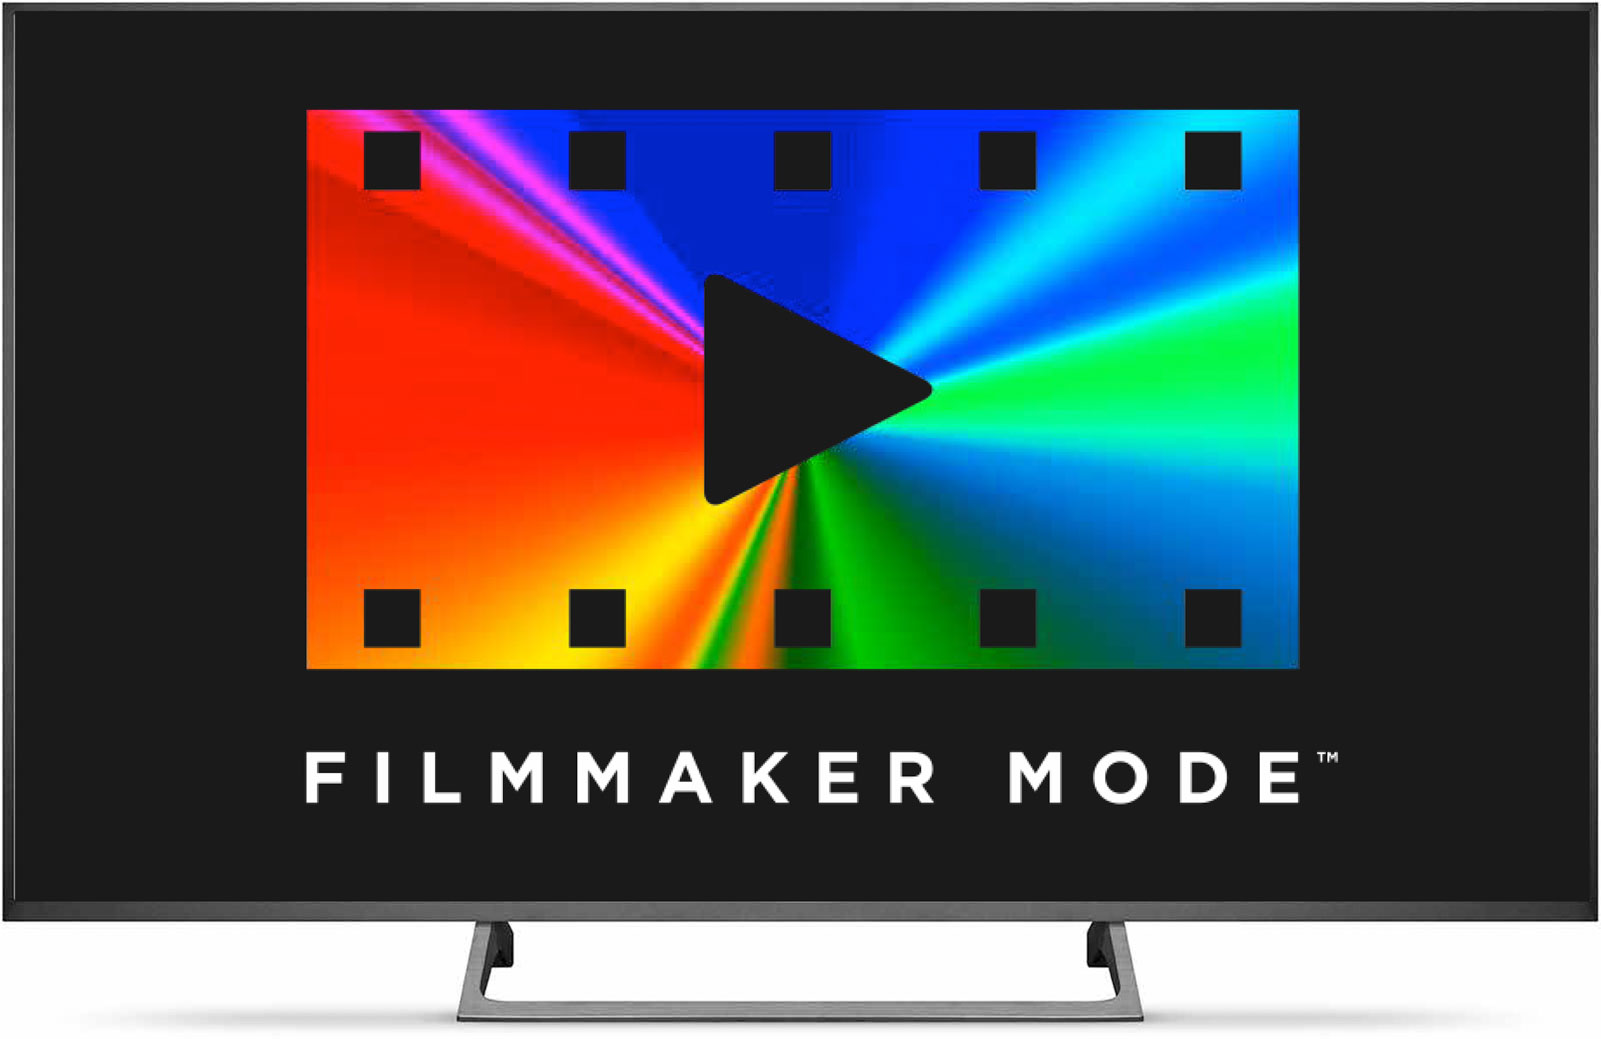 Filmmaker Mode in newer UHD TV sets/monitors guarantees matching cadence/framerate and more